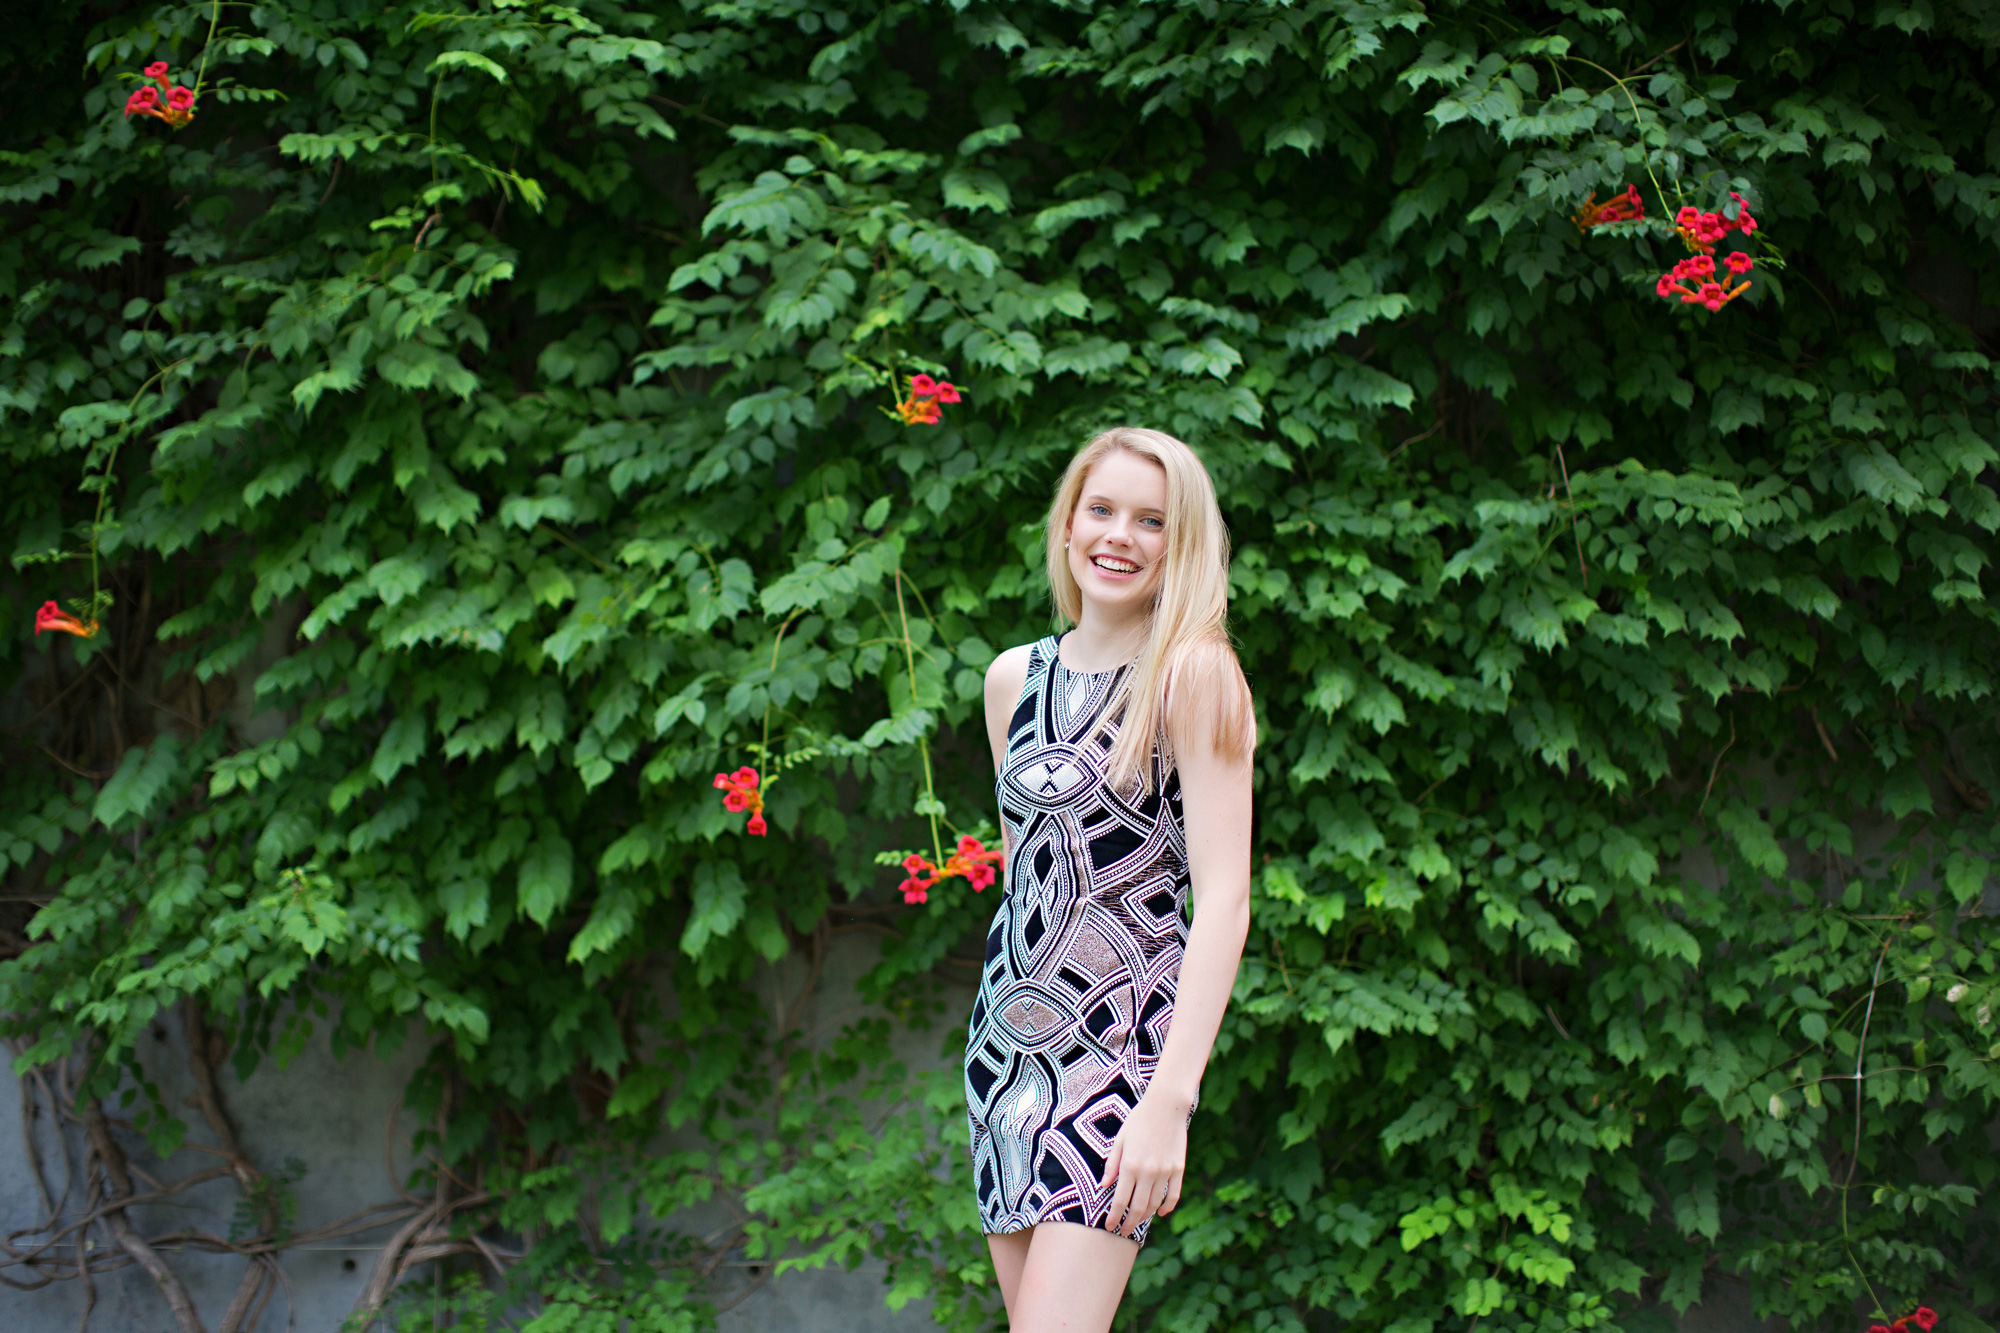 Girl posing in front of greenery wearing color-shifting dress